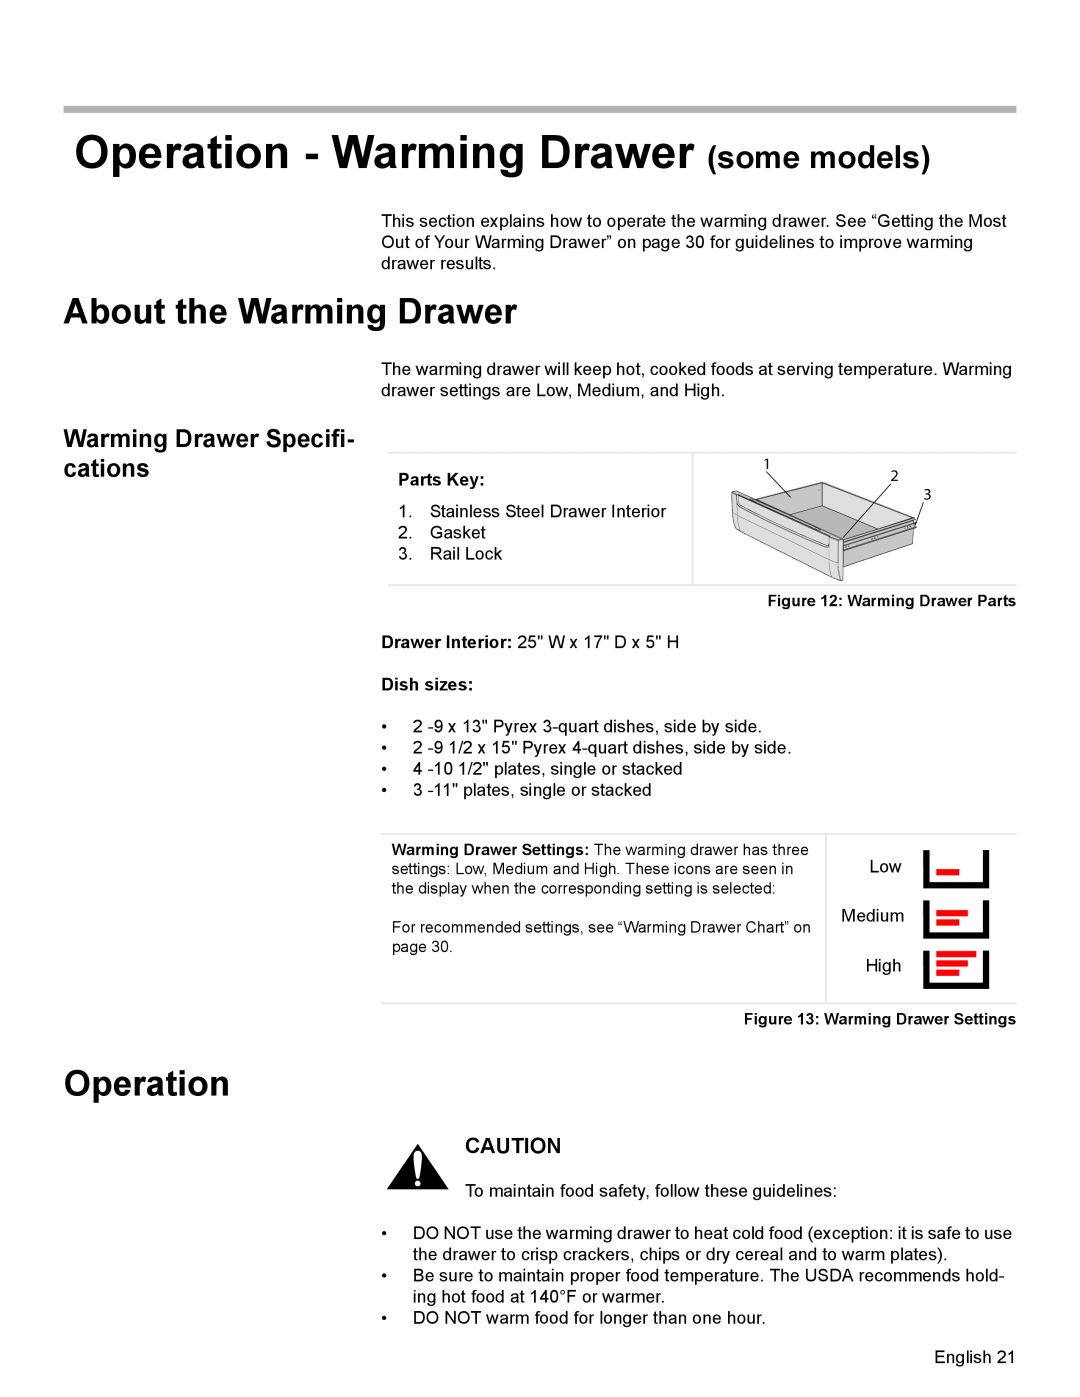 Bosch Appliances HGS7282UC manual Operation - Warming Drawer some models, About the Warming Drawer, Parts Key, Dish sizes 